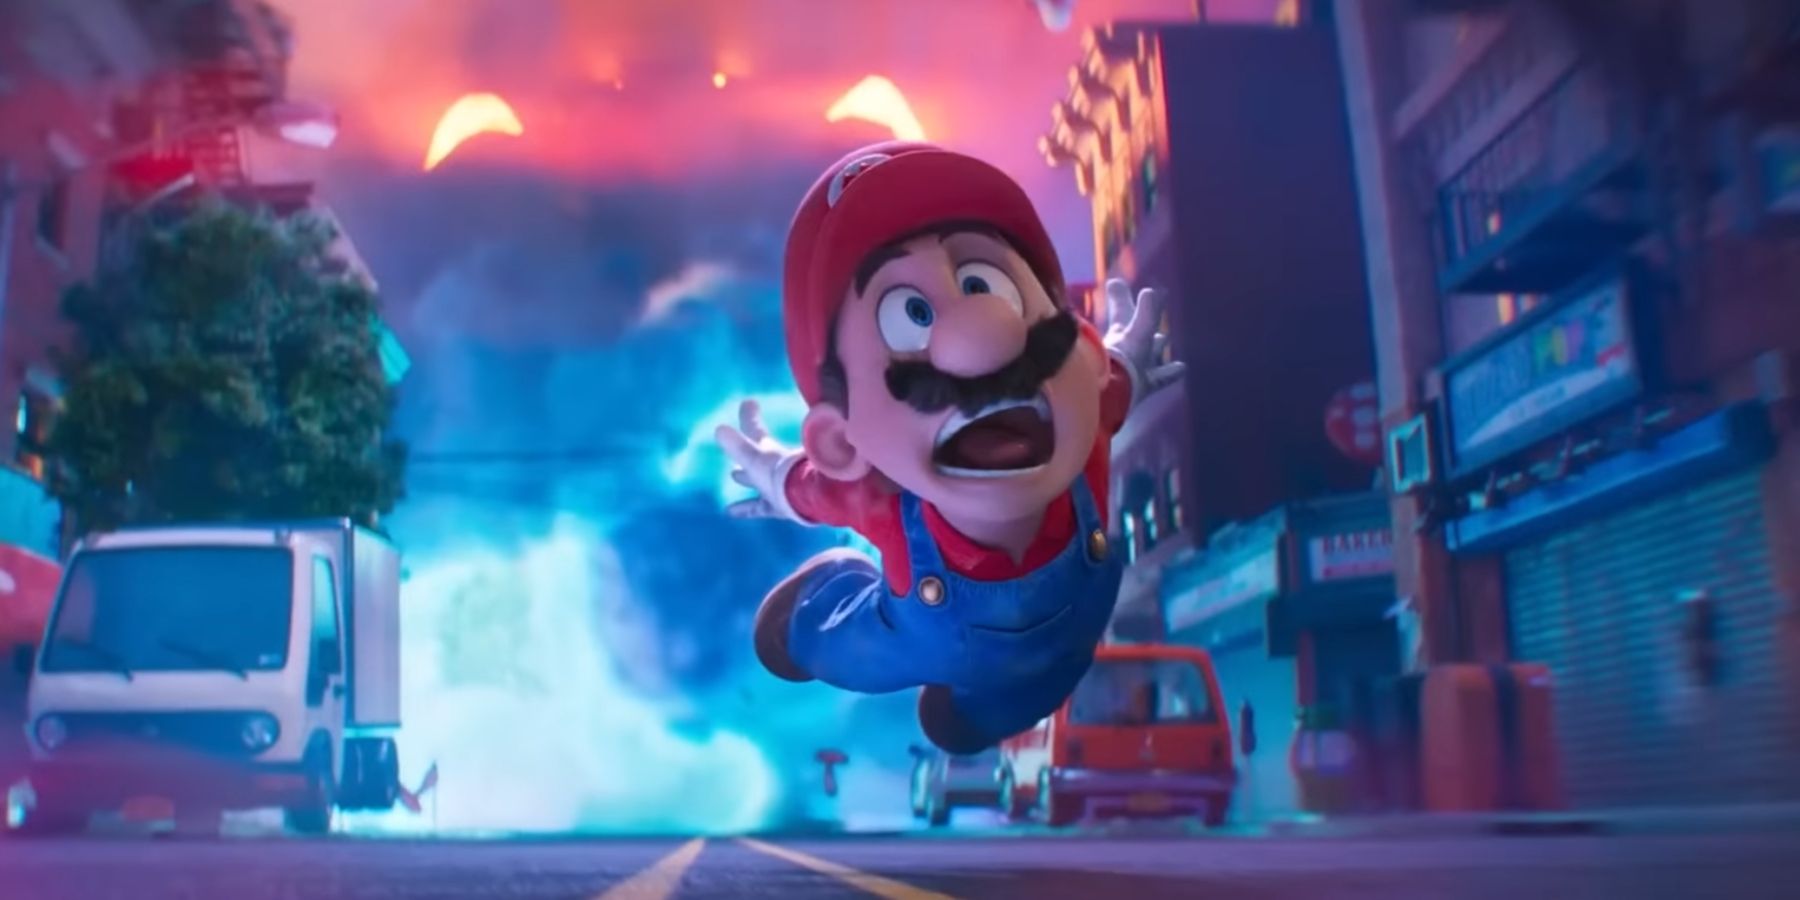 Mario flying through the air in slow motion in The Super Mario Bros. Movie